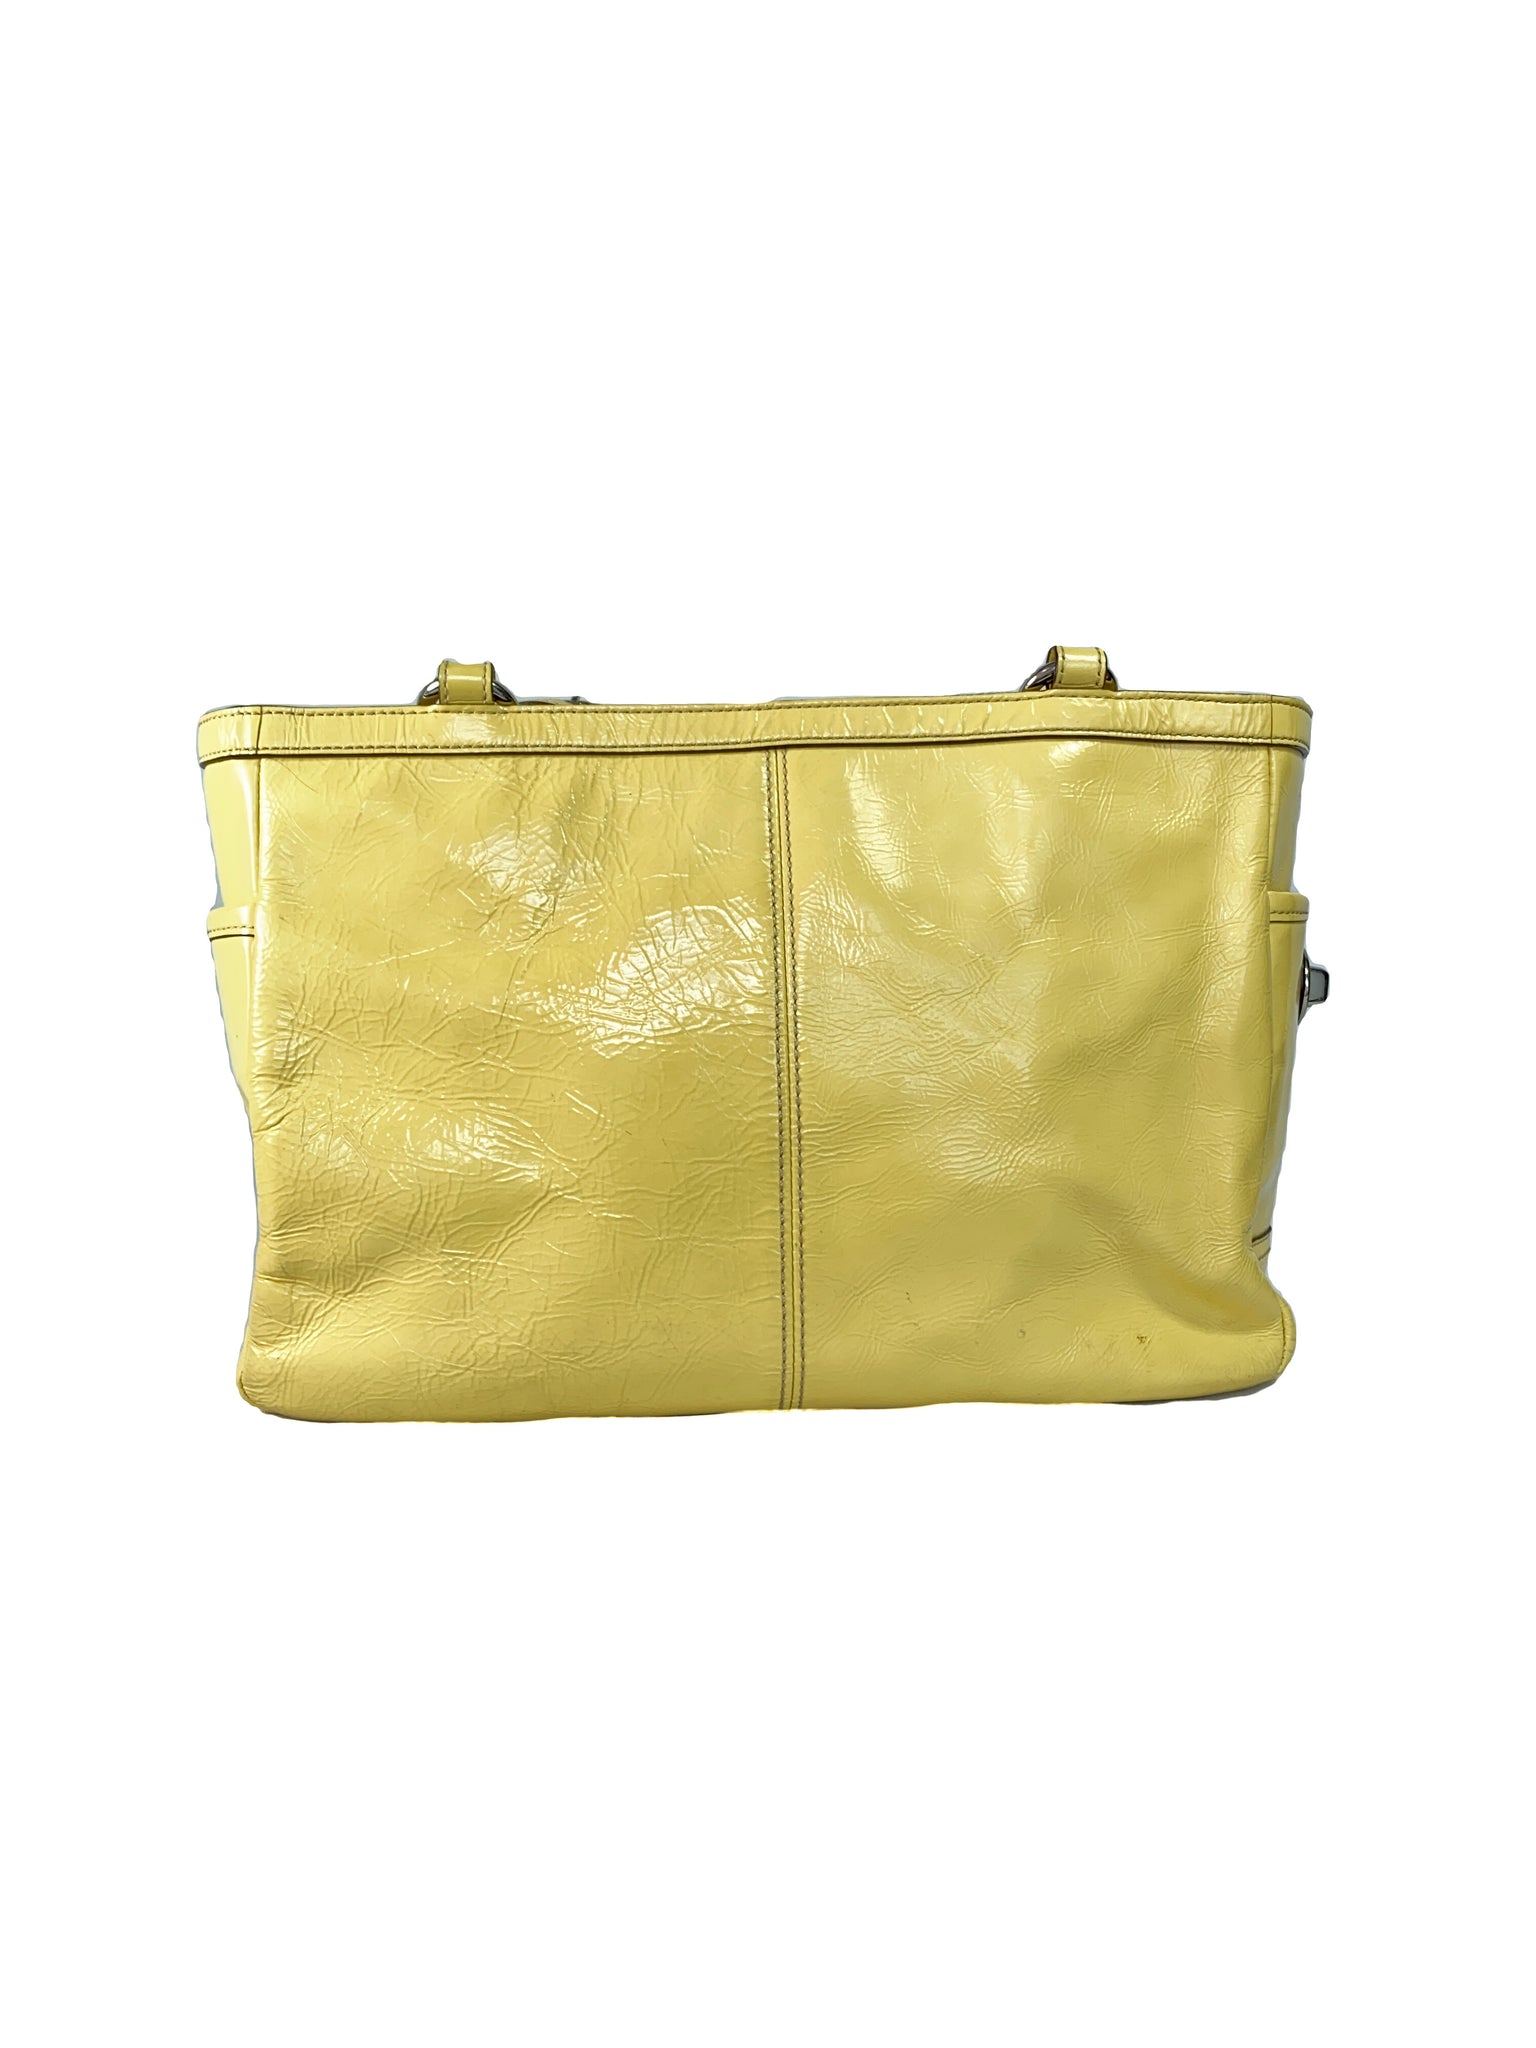 COACH Saddle Bag 23 In Glovetanned Leather in Yellow | Lyst